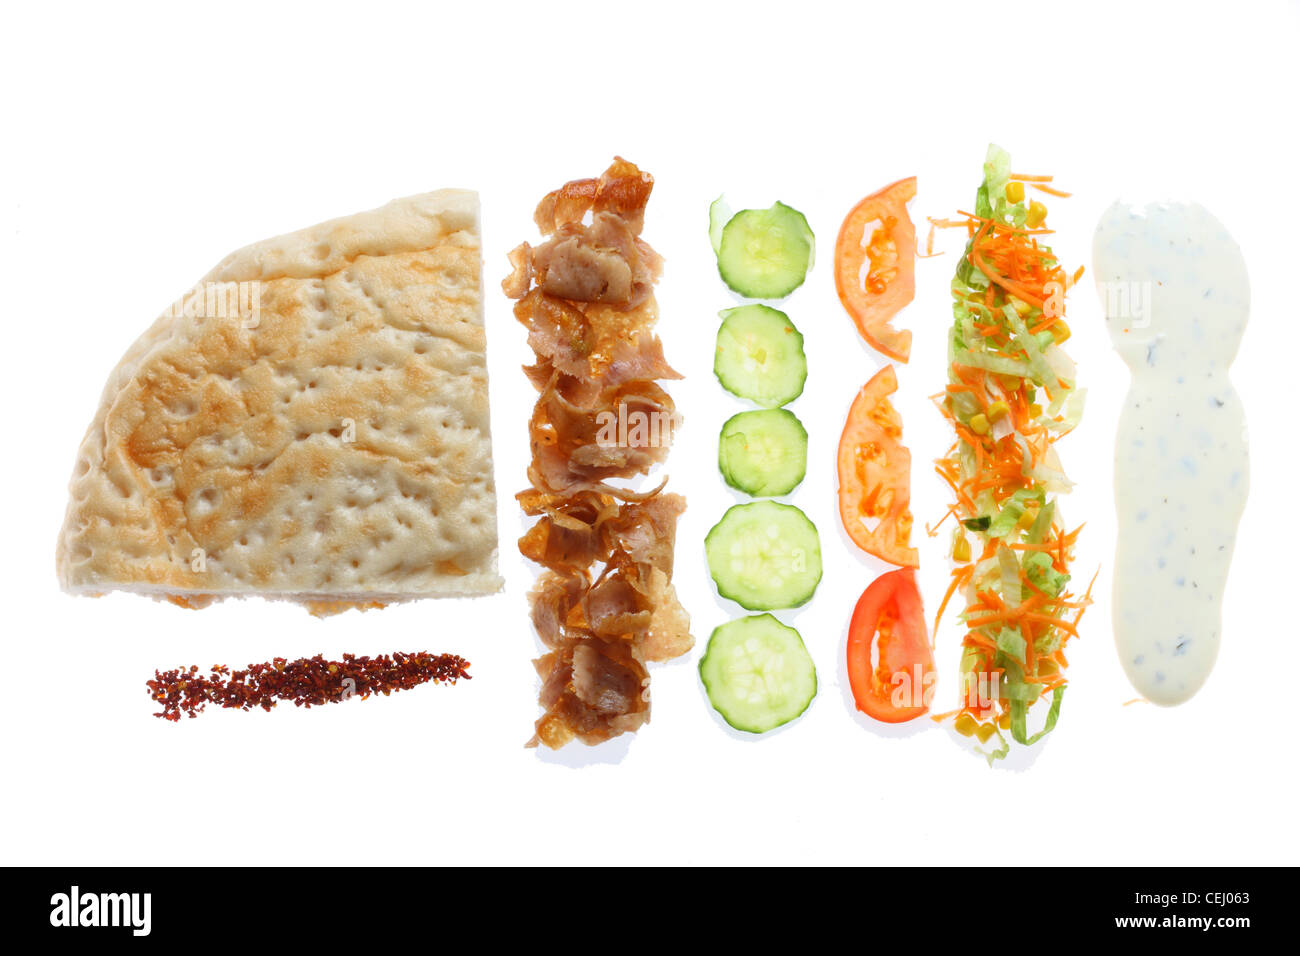 Compilation of the ingredients of a typical Turkish kebab. Meat, salad, garlic sauce, spices, pit bread. Stock Photo